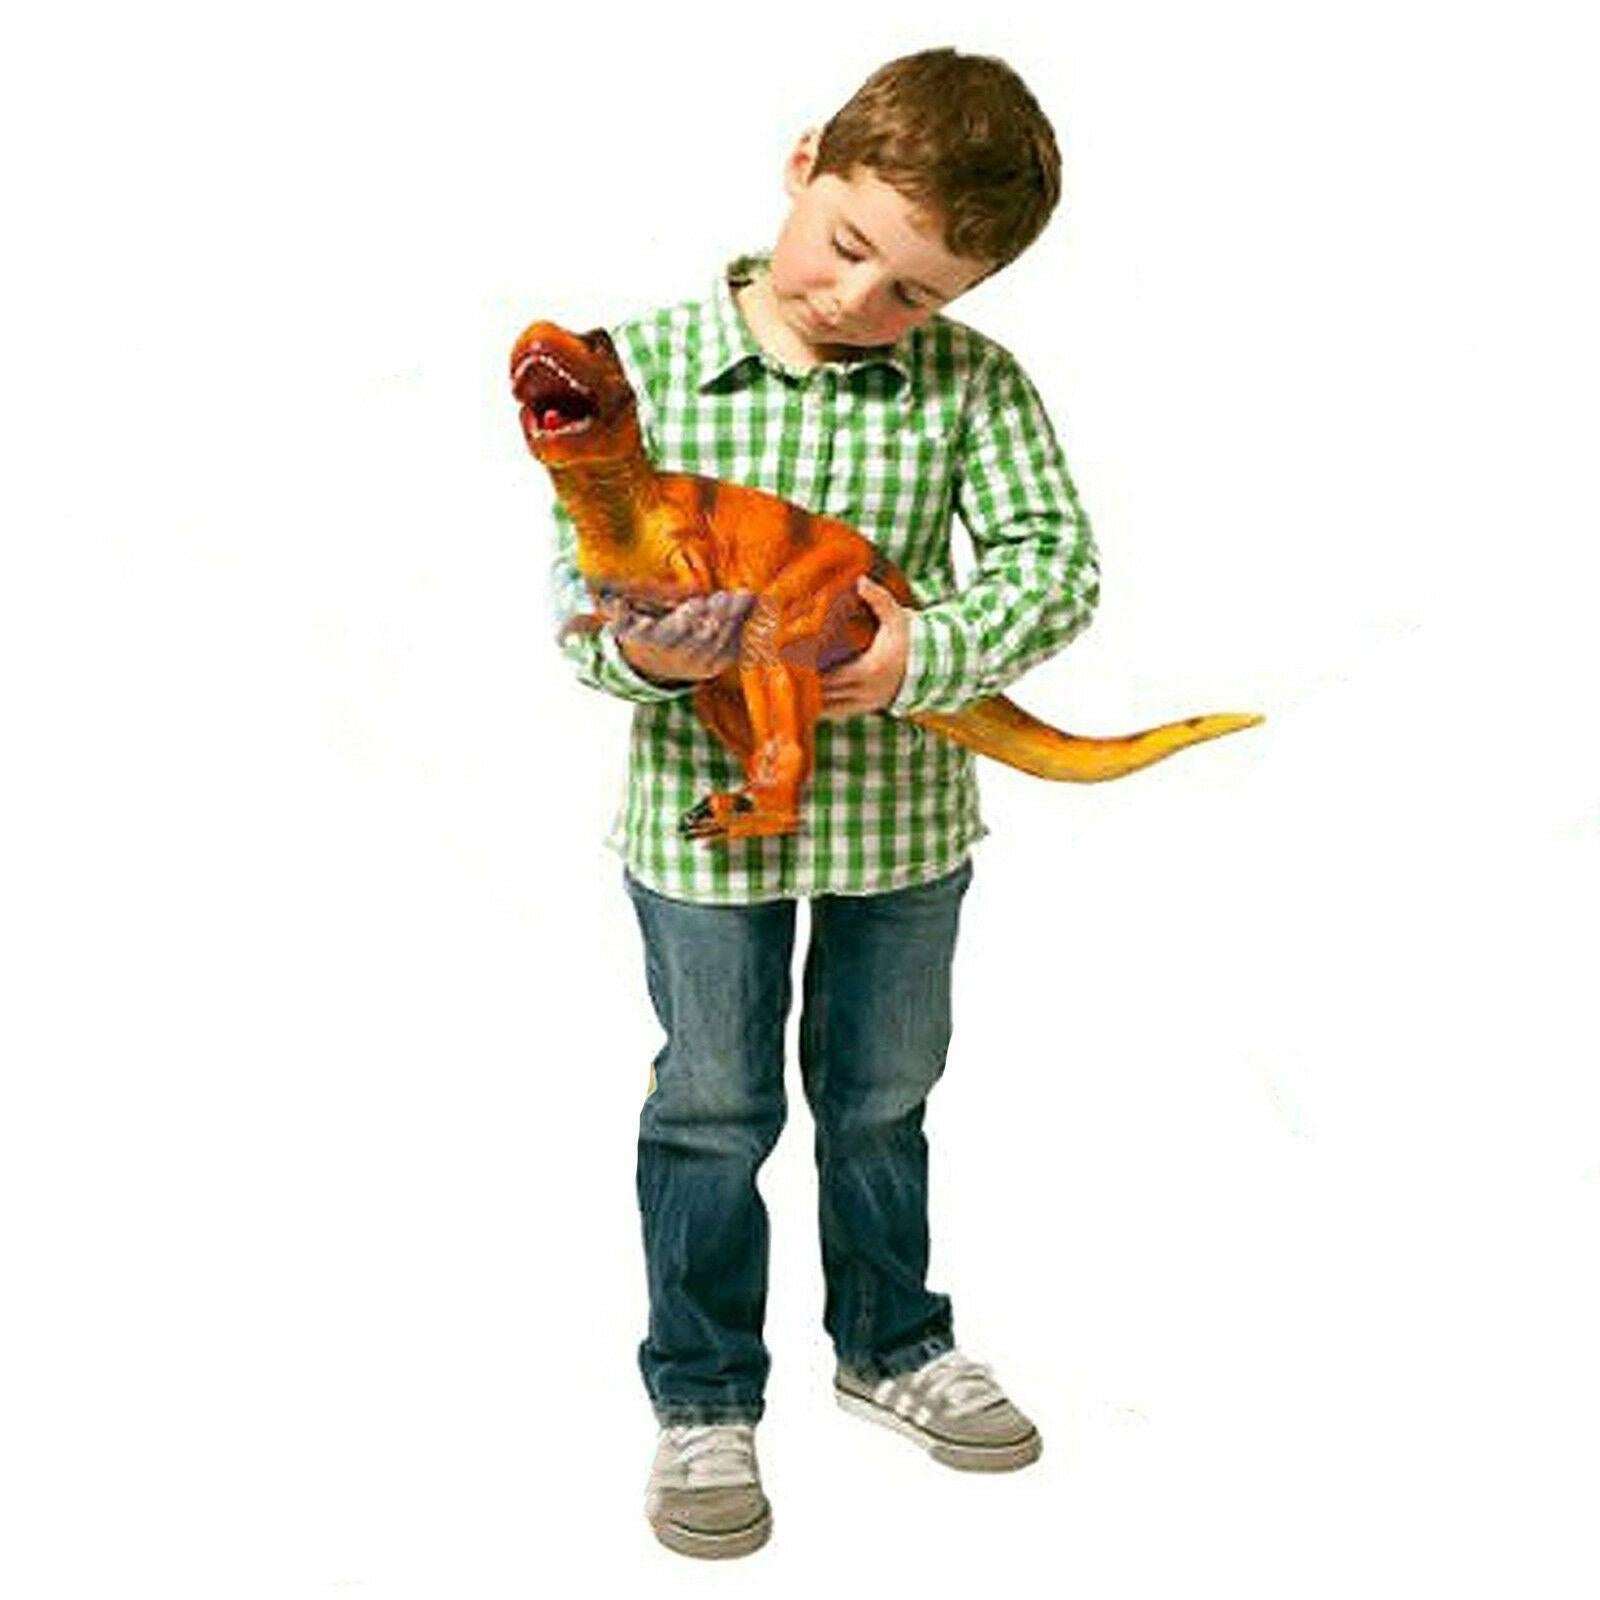 Large Soft Foam Dinosaurs by MTS - The Magic Toy Shop